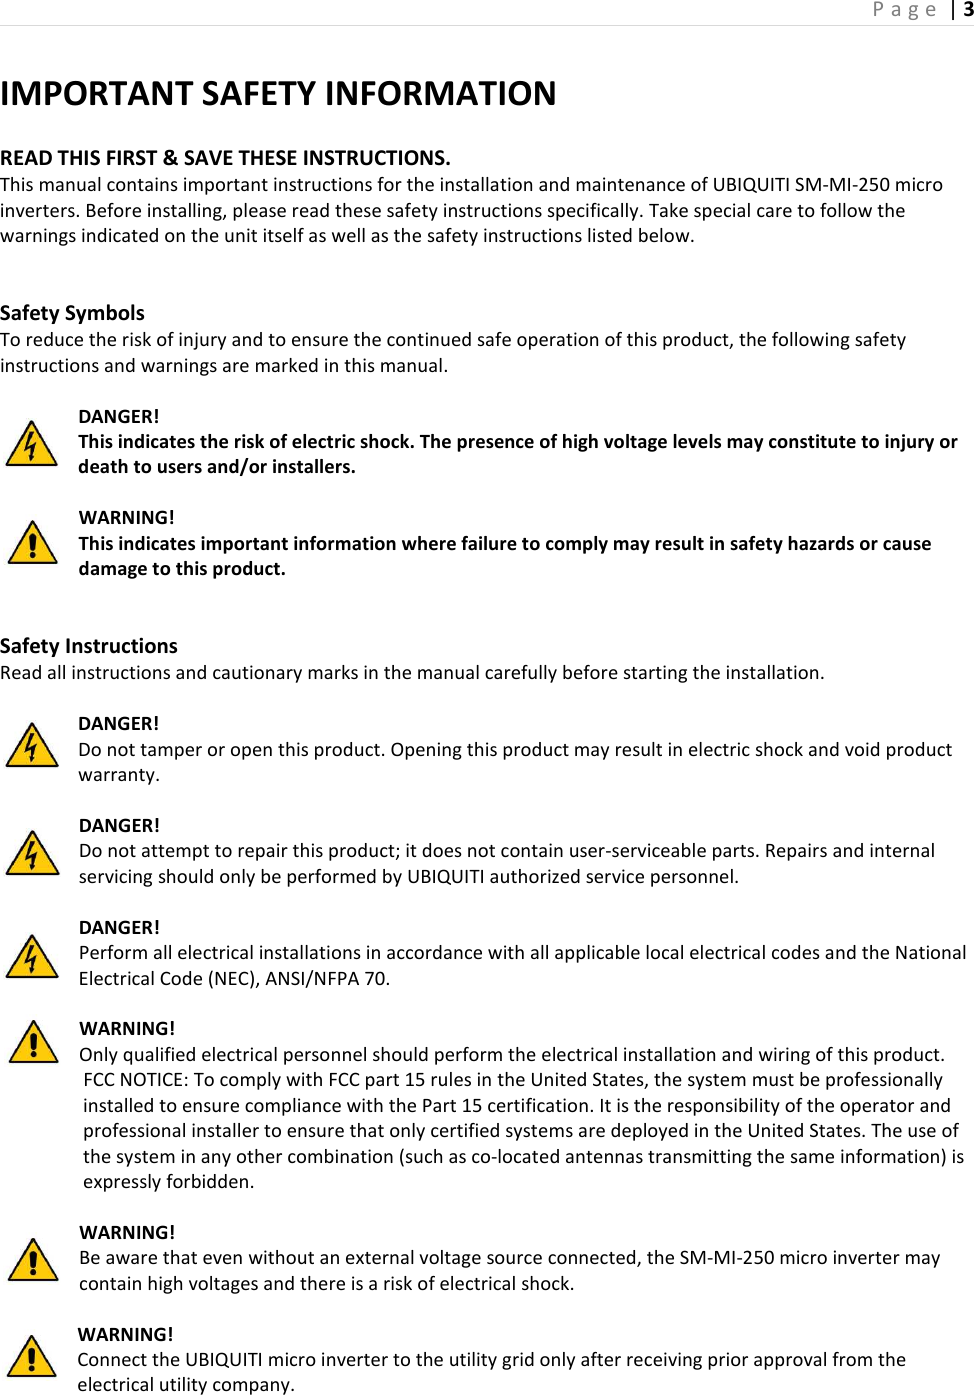 P a g e  | 3  IMPORTANT SAFETY INFORMATION  READ THIS FIRST &amp; SAVE THESE INSTRUCTIONS. This manual contains important instructions for the installation and maintenance of UBIQUITI SM-MI-250 micro inverters. Before installing, please read these safety instructions specifically. Take special care to follow the warnings indicated on the unit itself as well as the safety instructions listed below.   Safety Symbols To reduce the risk of injury and to ensure the continued safe operation of this product, the following safety instructions and warnings are marked in this manual.  DANGER!   This indicates the risk of electric shock. The presence of high voltage levels may constitute to injury or death to users and/or installers.  WARNING! This indicates important information where failure to comply may result in safety hazards or cause damage to this product.   Safety Instructions Read all instructions and cautionary marks in the manual carefully before starting the installation.  DANGER! Do not tamper or open this product. Opening this product may result in electric shock and void product warranty.  DANGER! Do not attempt to repair this product; it does not contain user-serviceable parts. Repairs and internal servicing should only be performed by UBIQUITI authorized service personnel.  DANGER! Perform all electrical installations in accordance with all applicable local electrical codes and the National Electrical Code (NEC), ANSI/NFPA 70.  WARNING! Only qualified electrical personnel should perform the electrical installation and wiring of this product.                   FCC NOTICE: To comply with FCC part 15 rules in the United States, the system must be professionally installed to ensure compliance with the Part 15 certification. It is the responsibility of the operator and professional installer to ensure that only certified systems are deployed in the United States. The use of the system in any other combination (such as co-located antennas transmitting the same information) is expressly forbidden.  WARNING! Be aware that even without an external voltage source connected, the SM-MI-250 micro inverter may contain high voltages and there is a risk of electrical shock.  WARNING! Connect the UBIQUITI micro inverter to the utility grid only after receiving prior approval from the electrical utility company. 